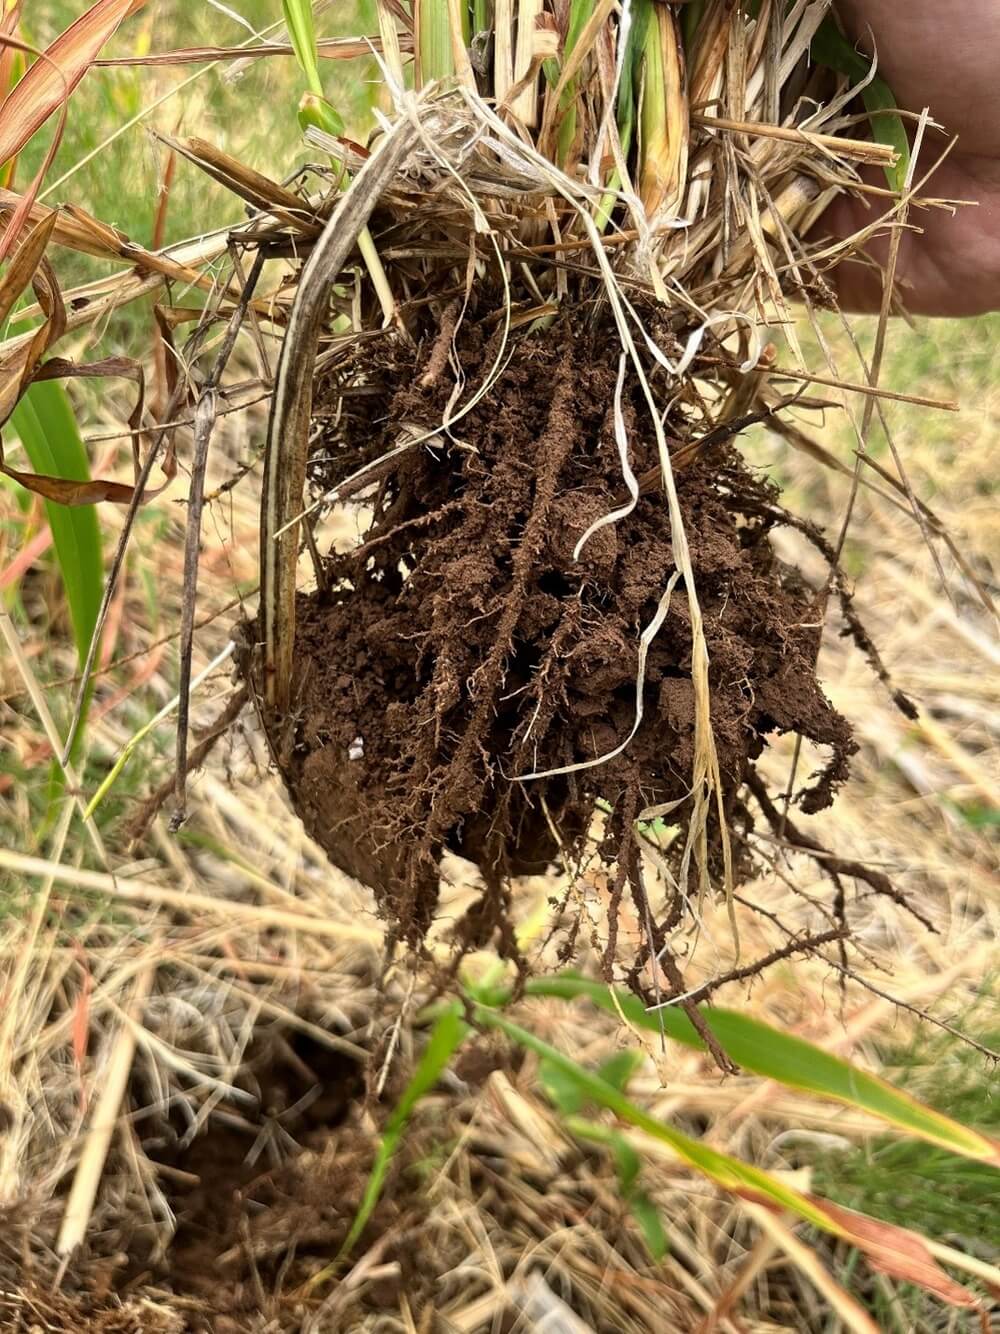 Soil Health Principles- Living Roots As Often As Possible